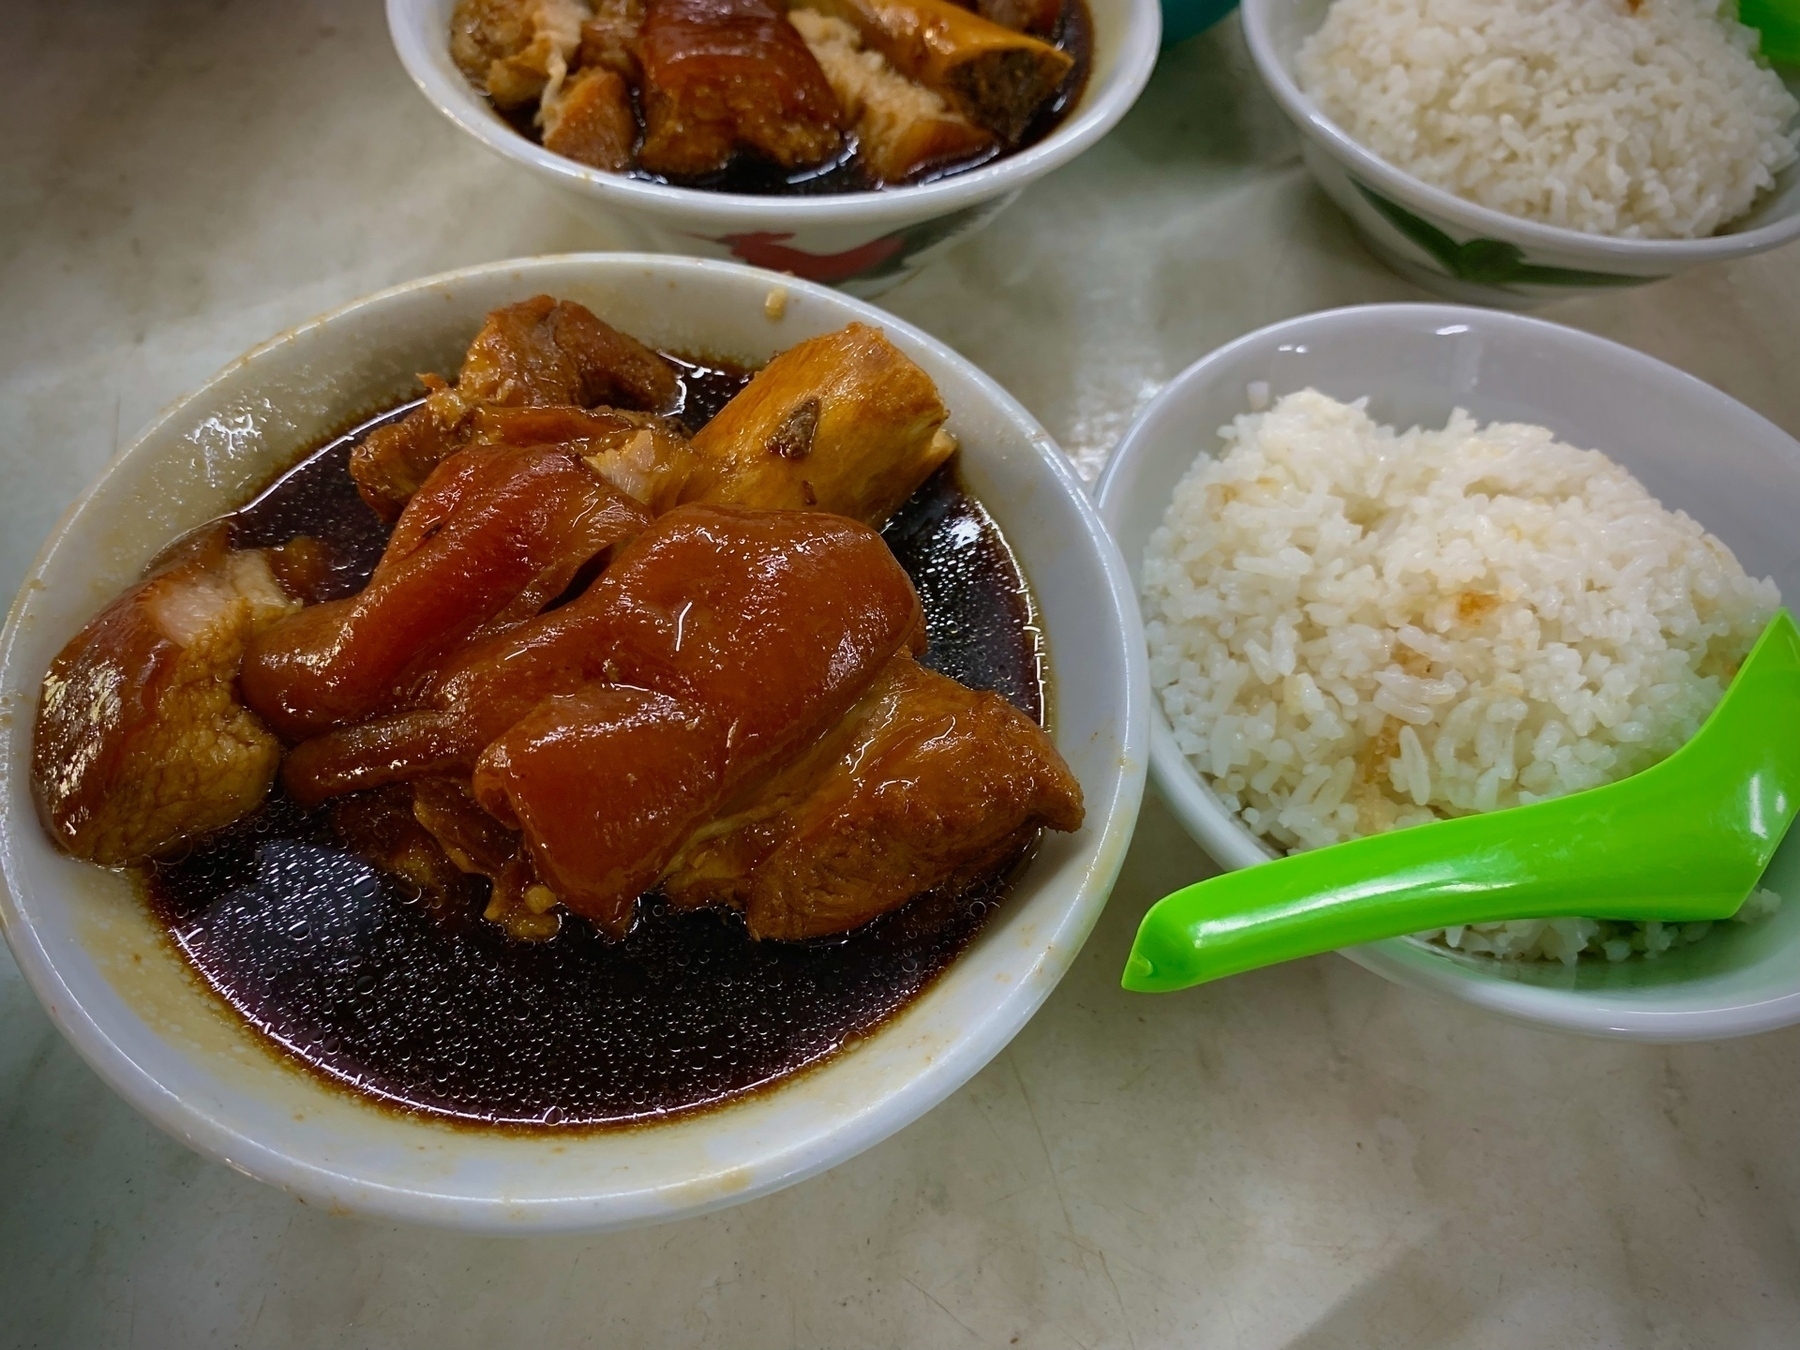 Pork knuckle in Bak kut teh broth along with a bowl of rice